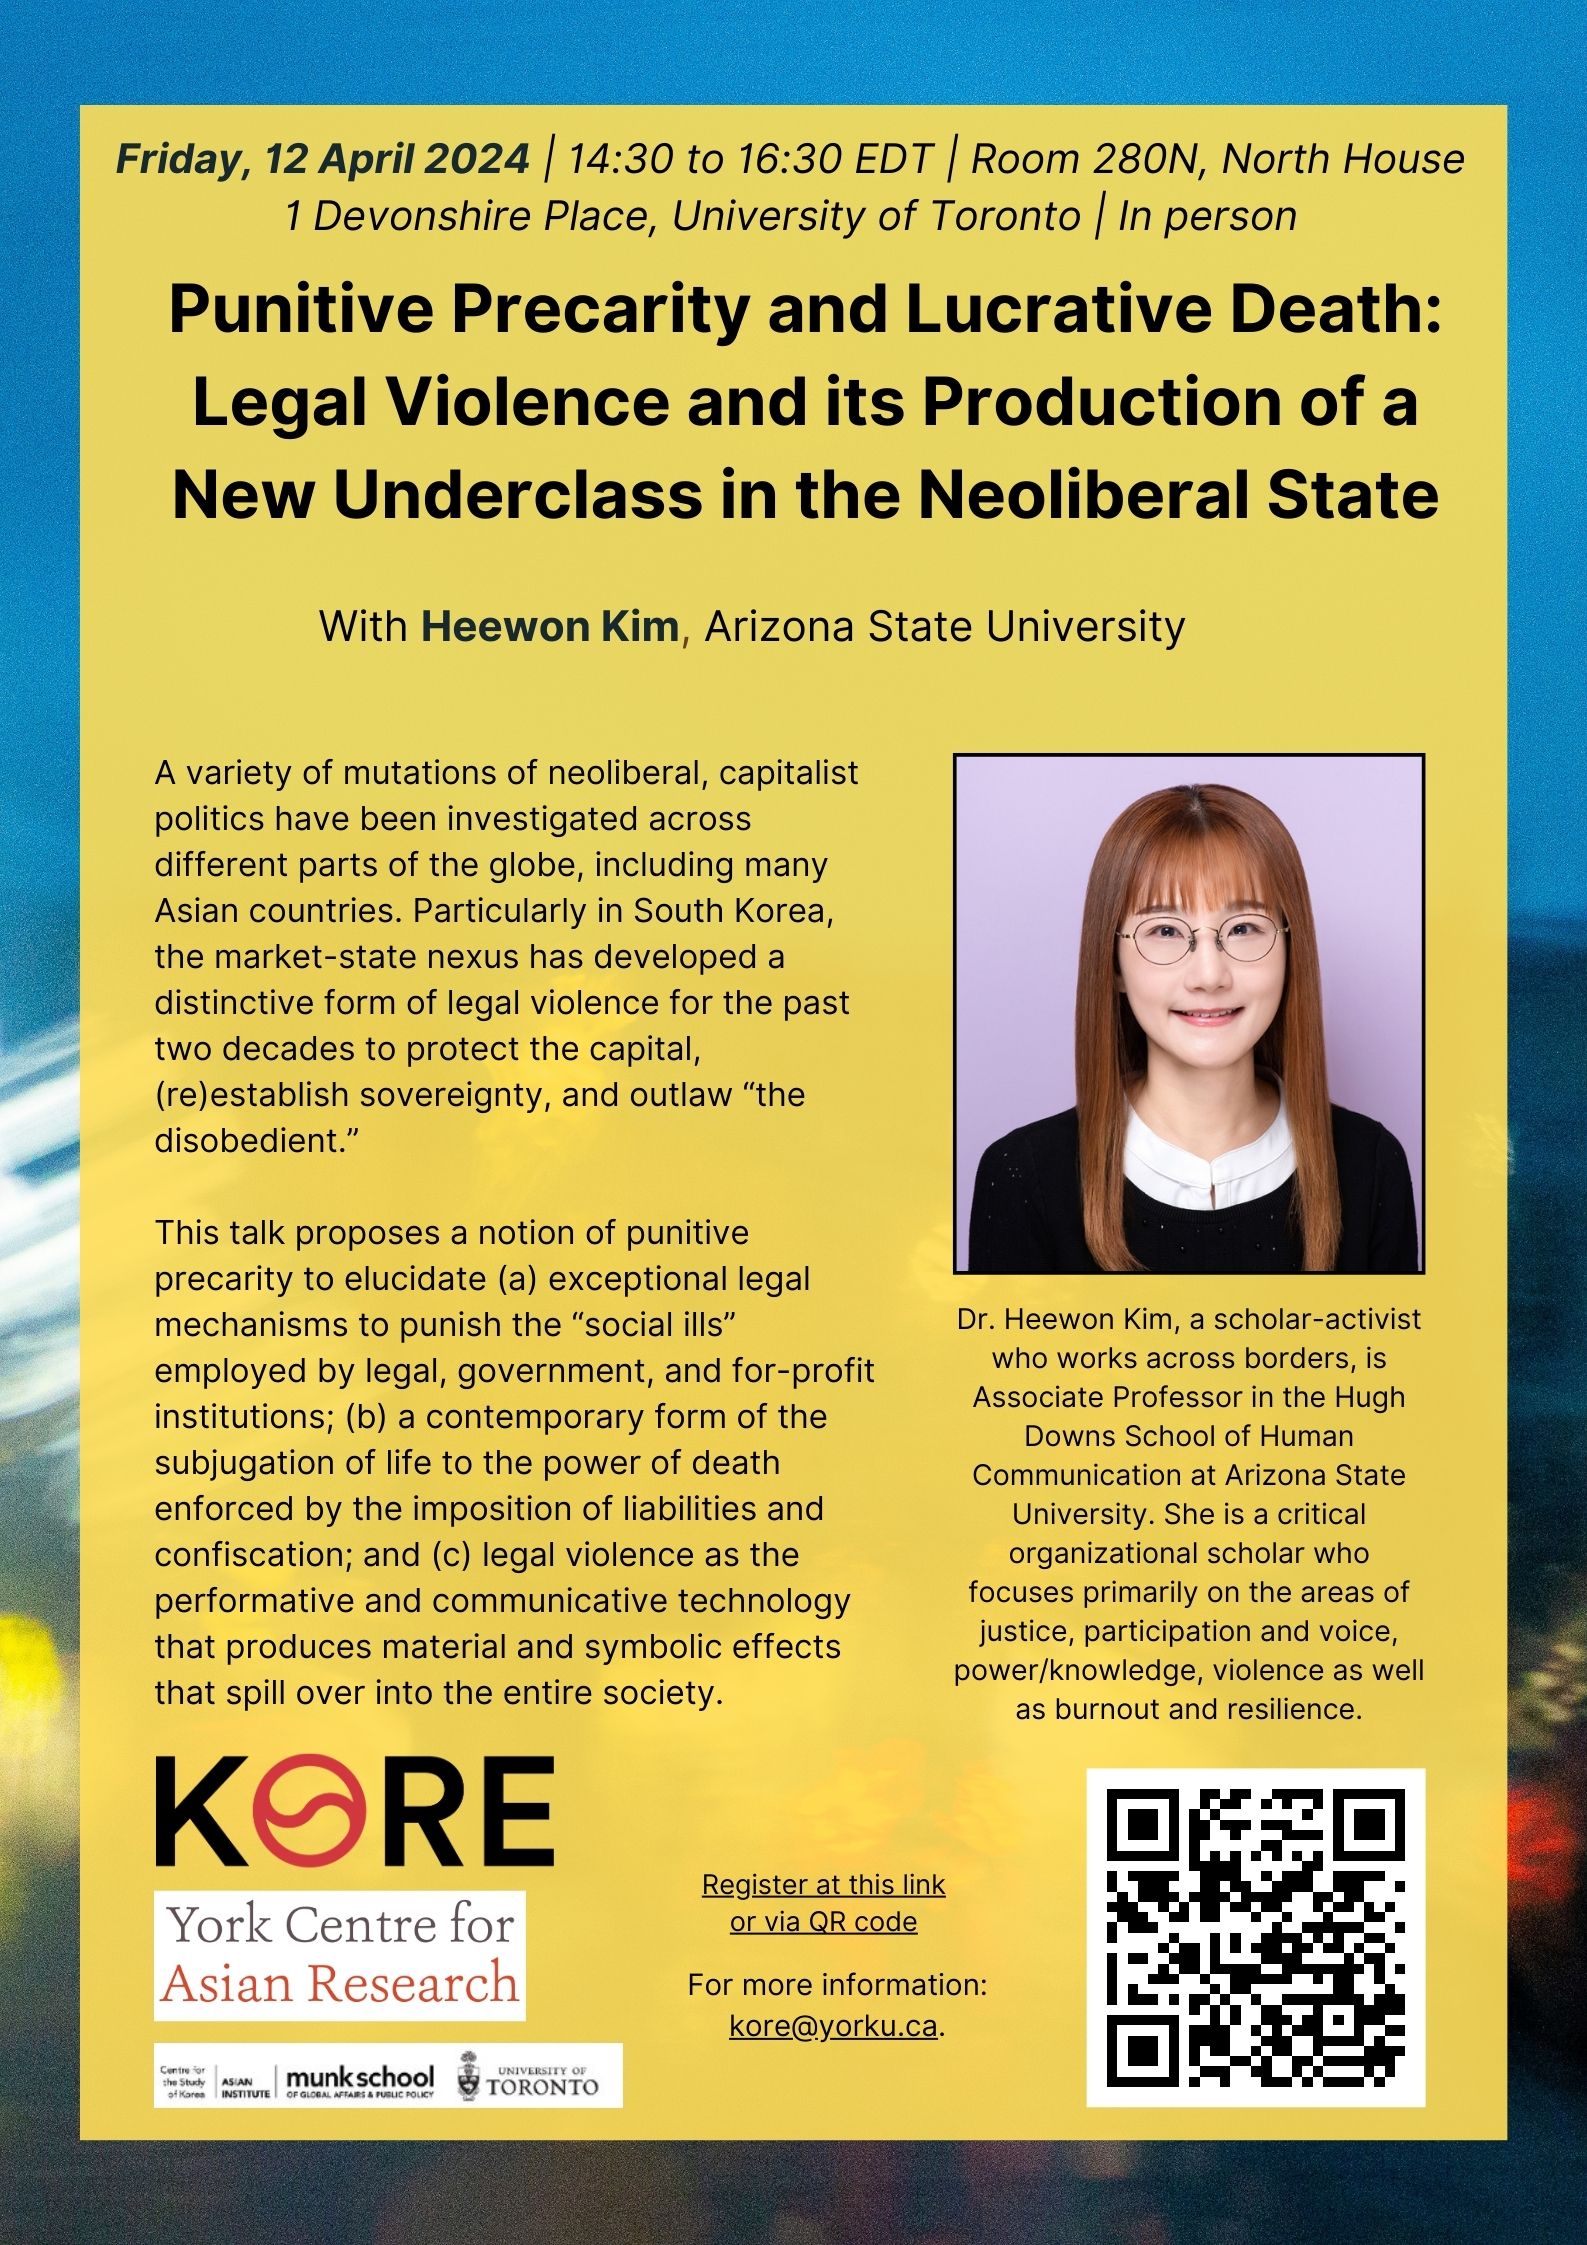 Poster for Punitive Precarity and Lucrative Death: Legal Violence and its Production of a New Underclass in the Neoliberal State with Heewon Kim on 12 April 2024